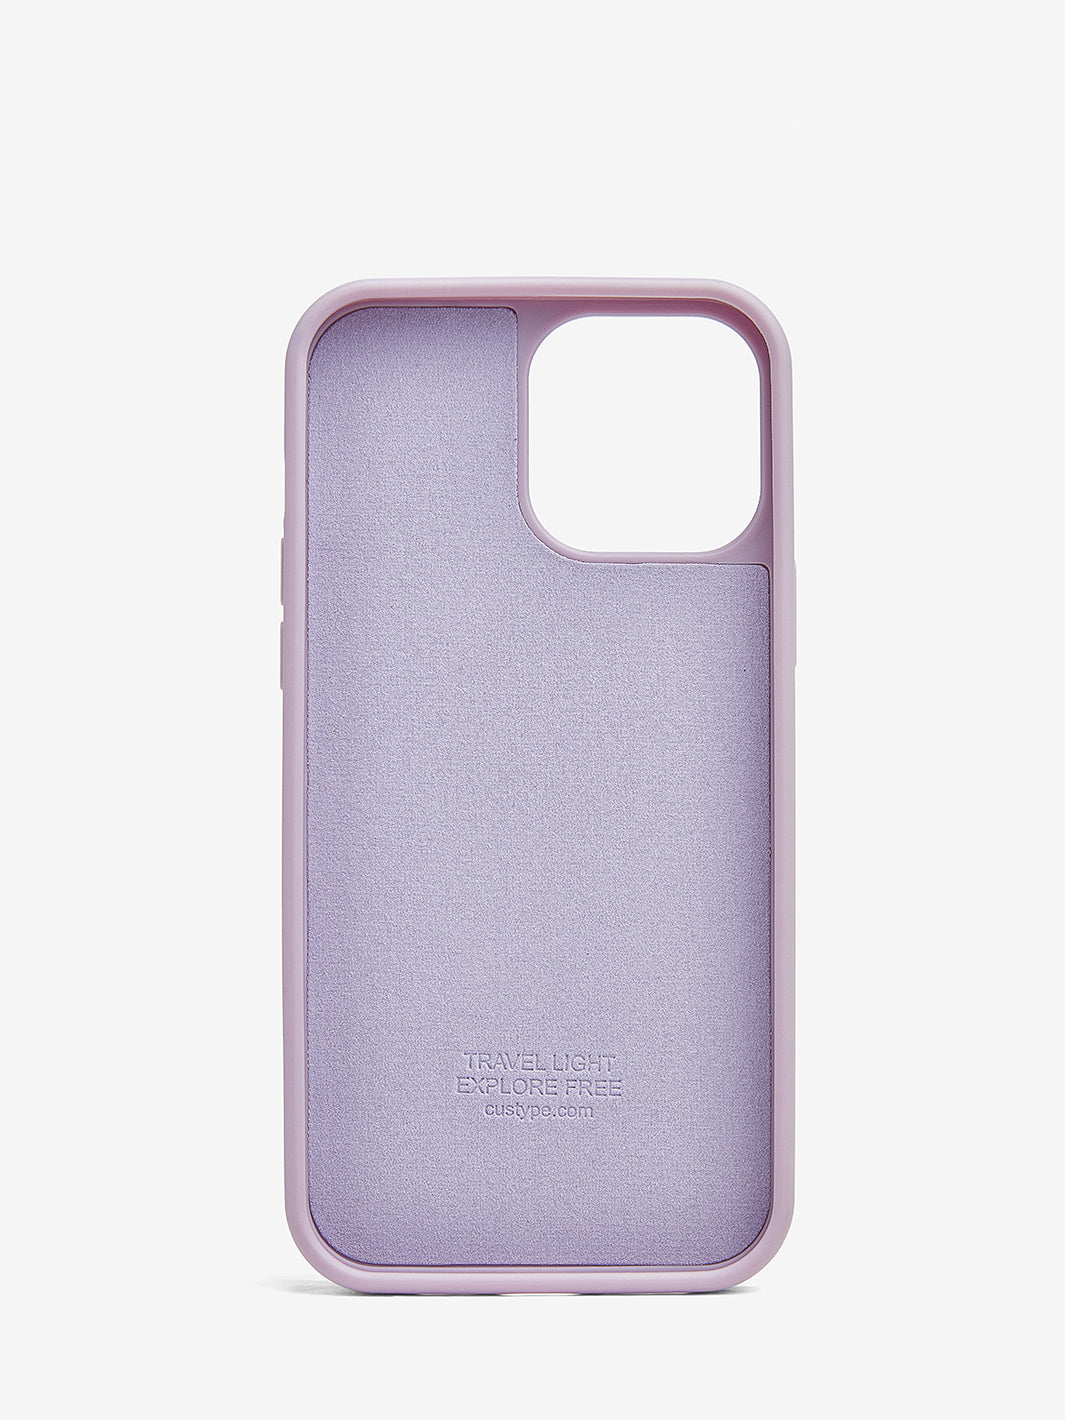 Personal Touch- Customized Alphabet Phone Case-purple